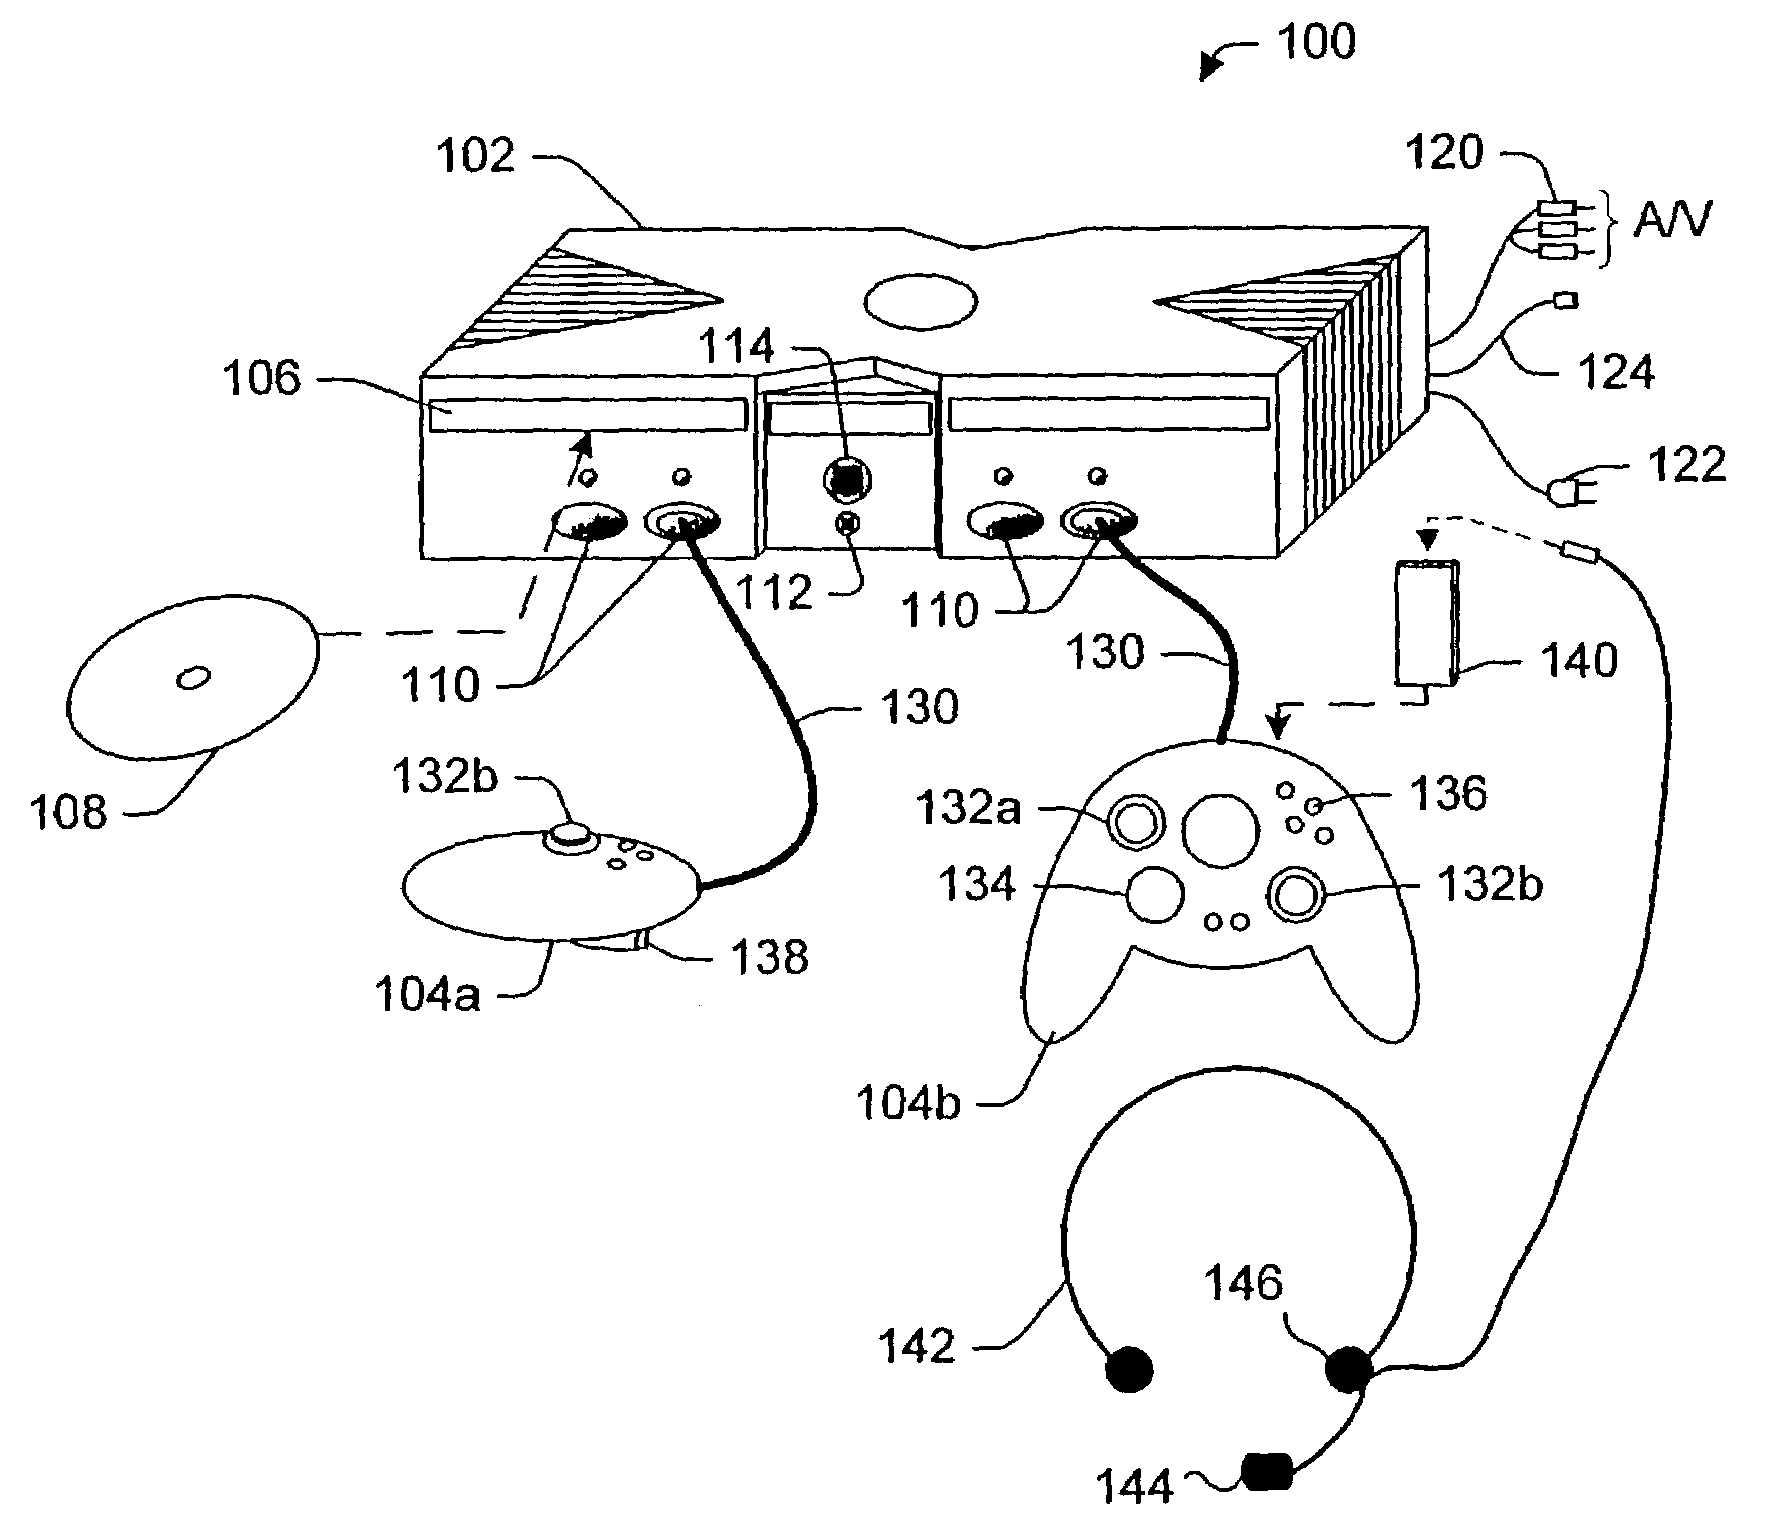 Use of multiple player real-time voice communications on a gaming device